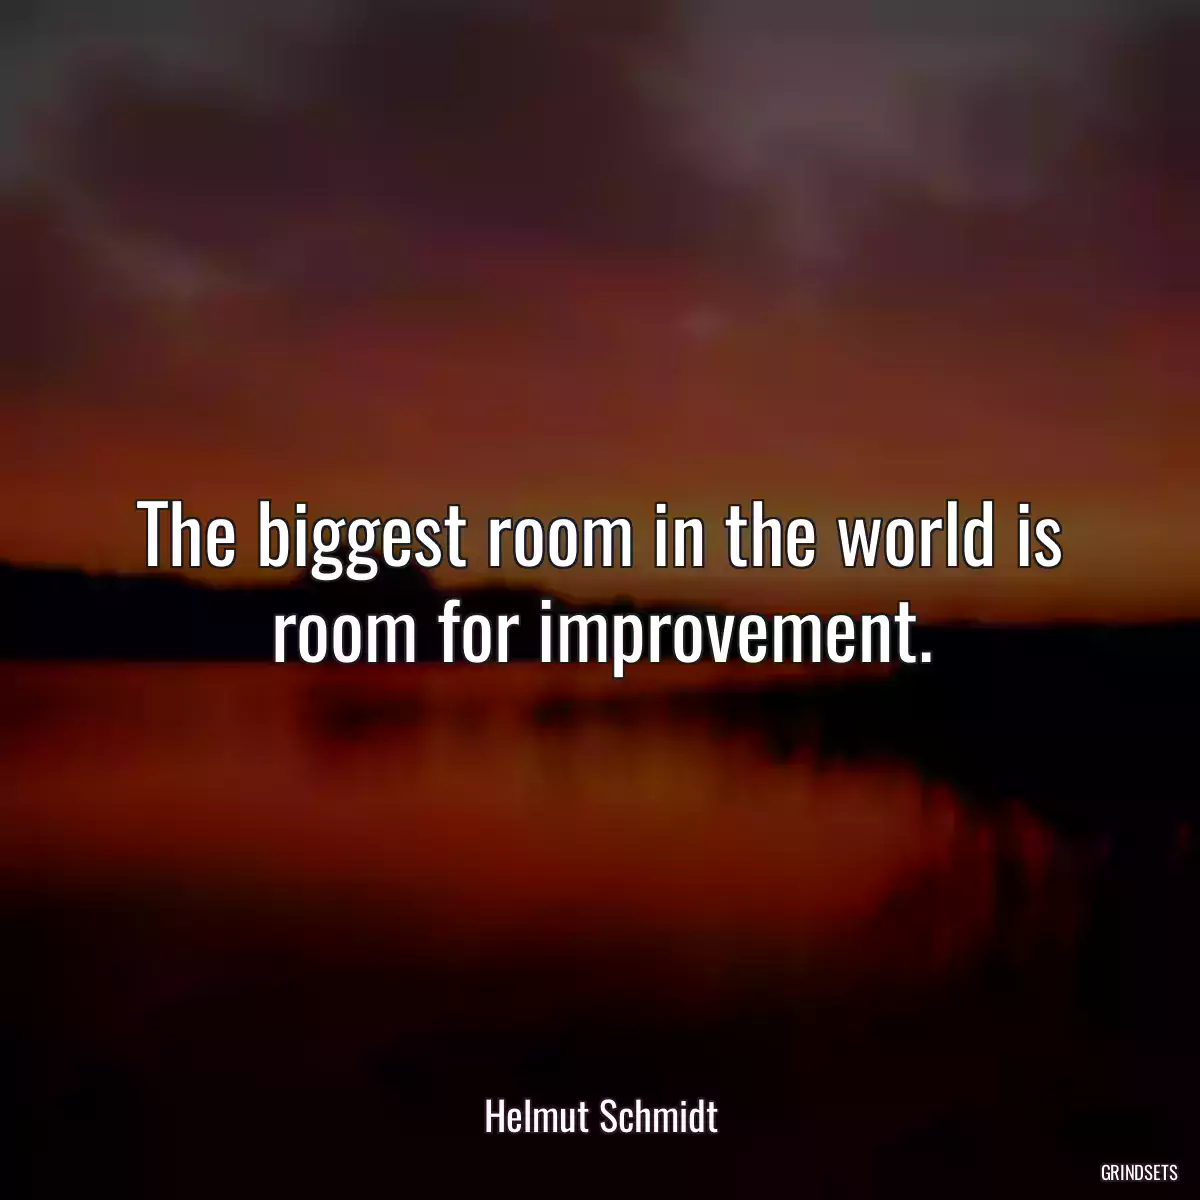 The biggest room in the world is room for improvement.